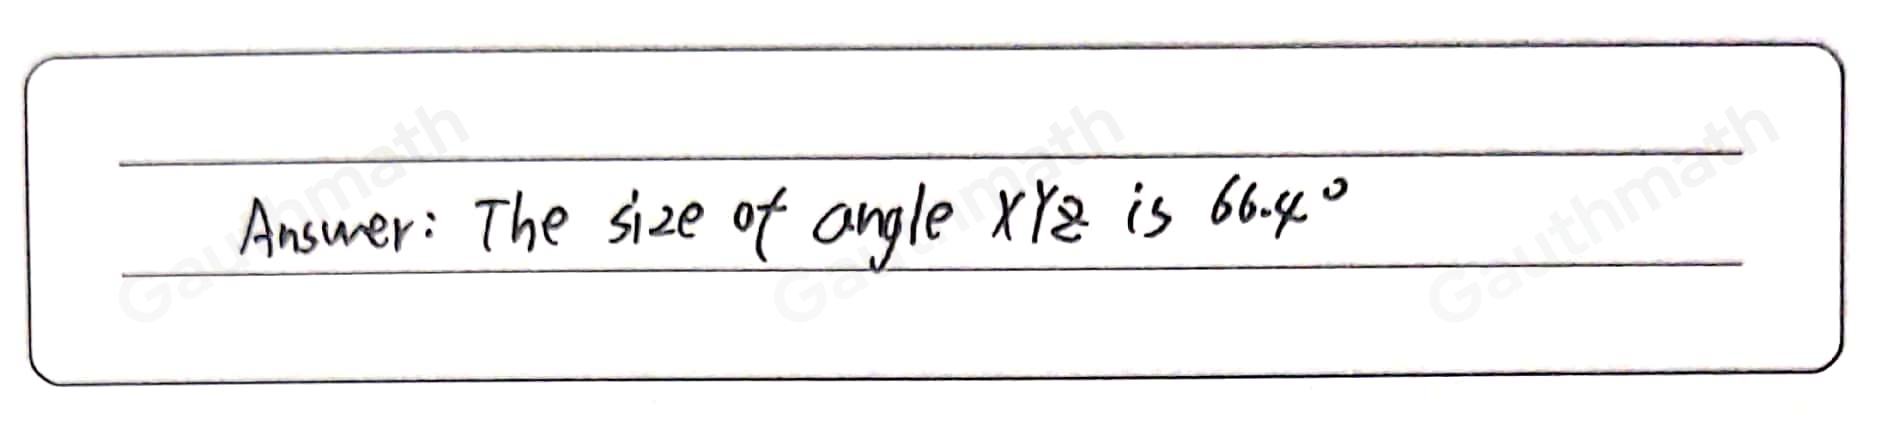 Find the size of angle XYZ. Give your answer to 1 decimal place. 6 cm